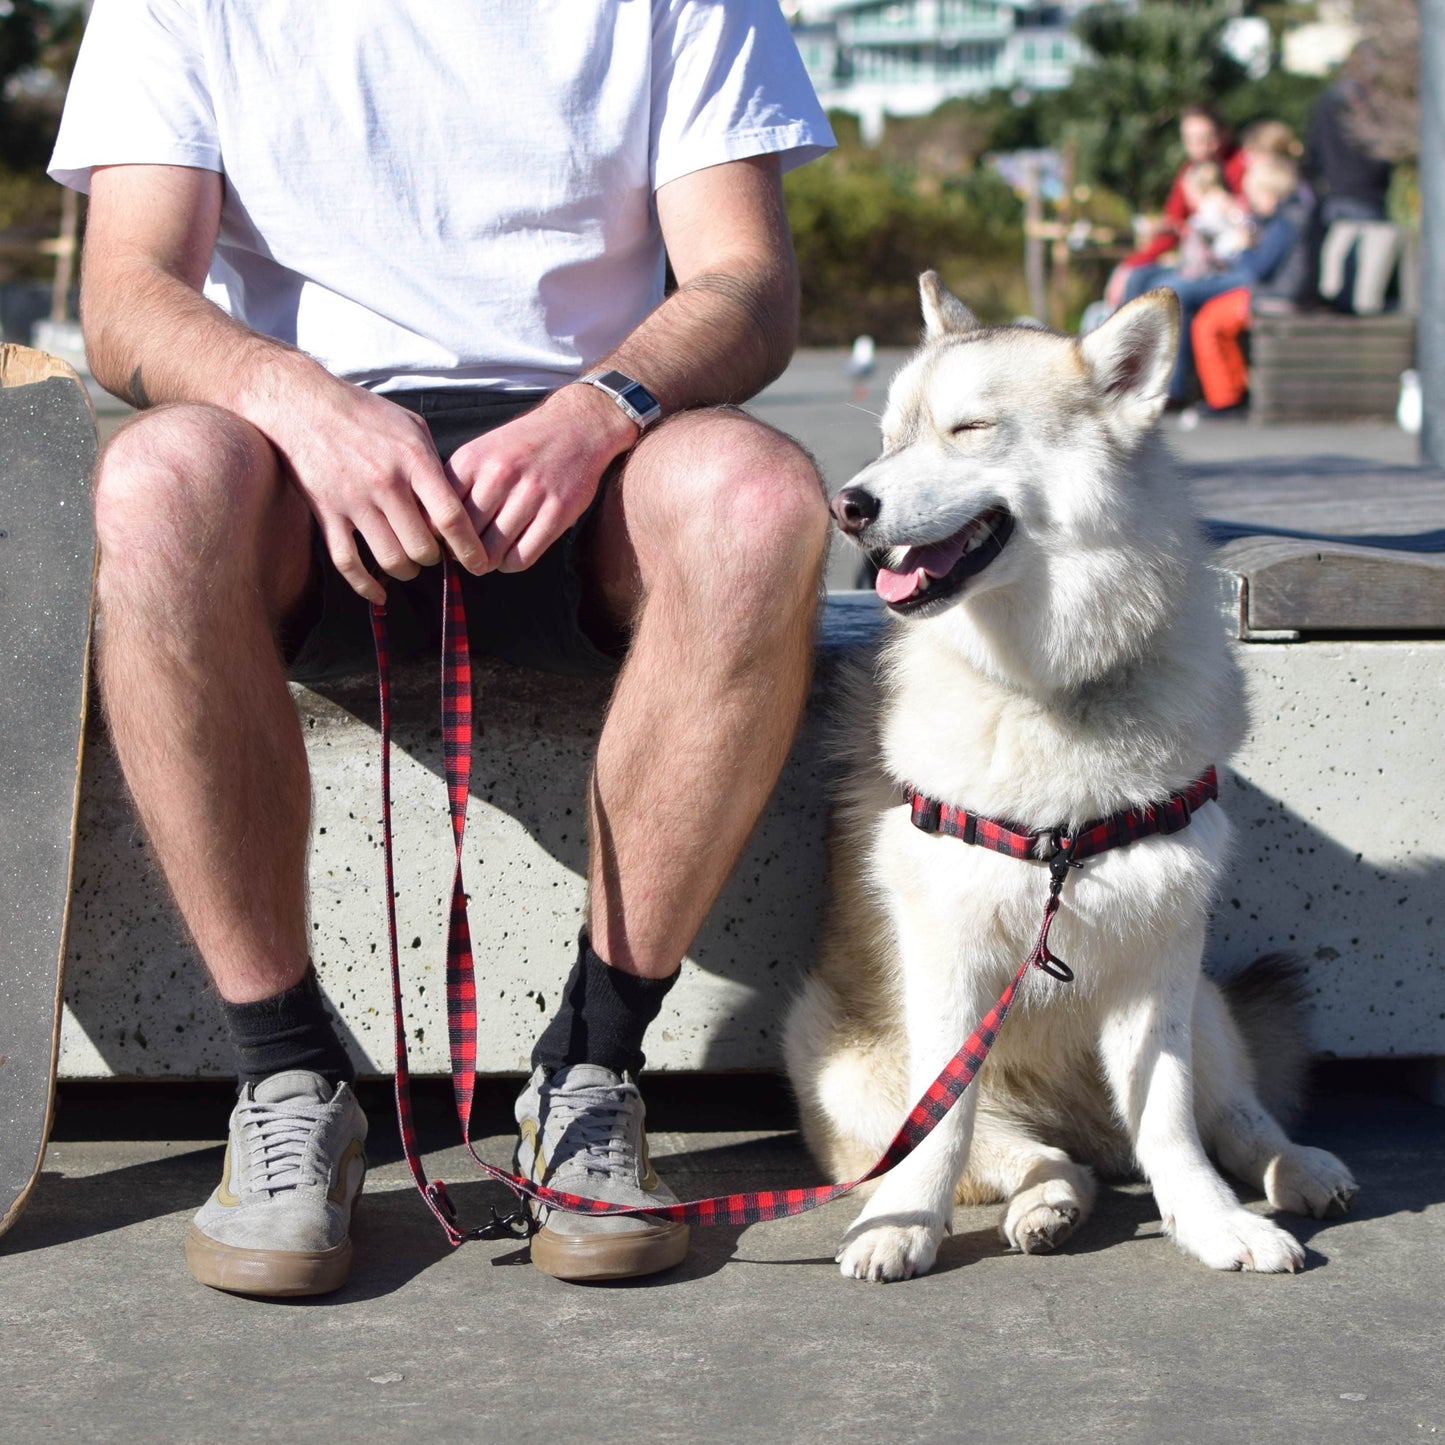 Man and dog sitting at a skate park. Man is holding a red and black checked dog leash.